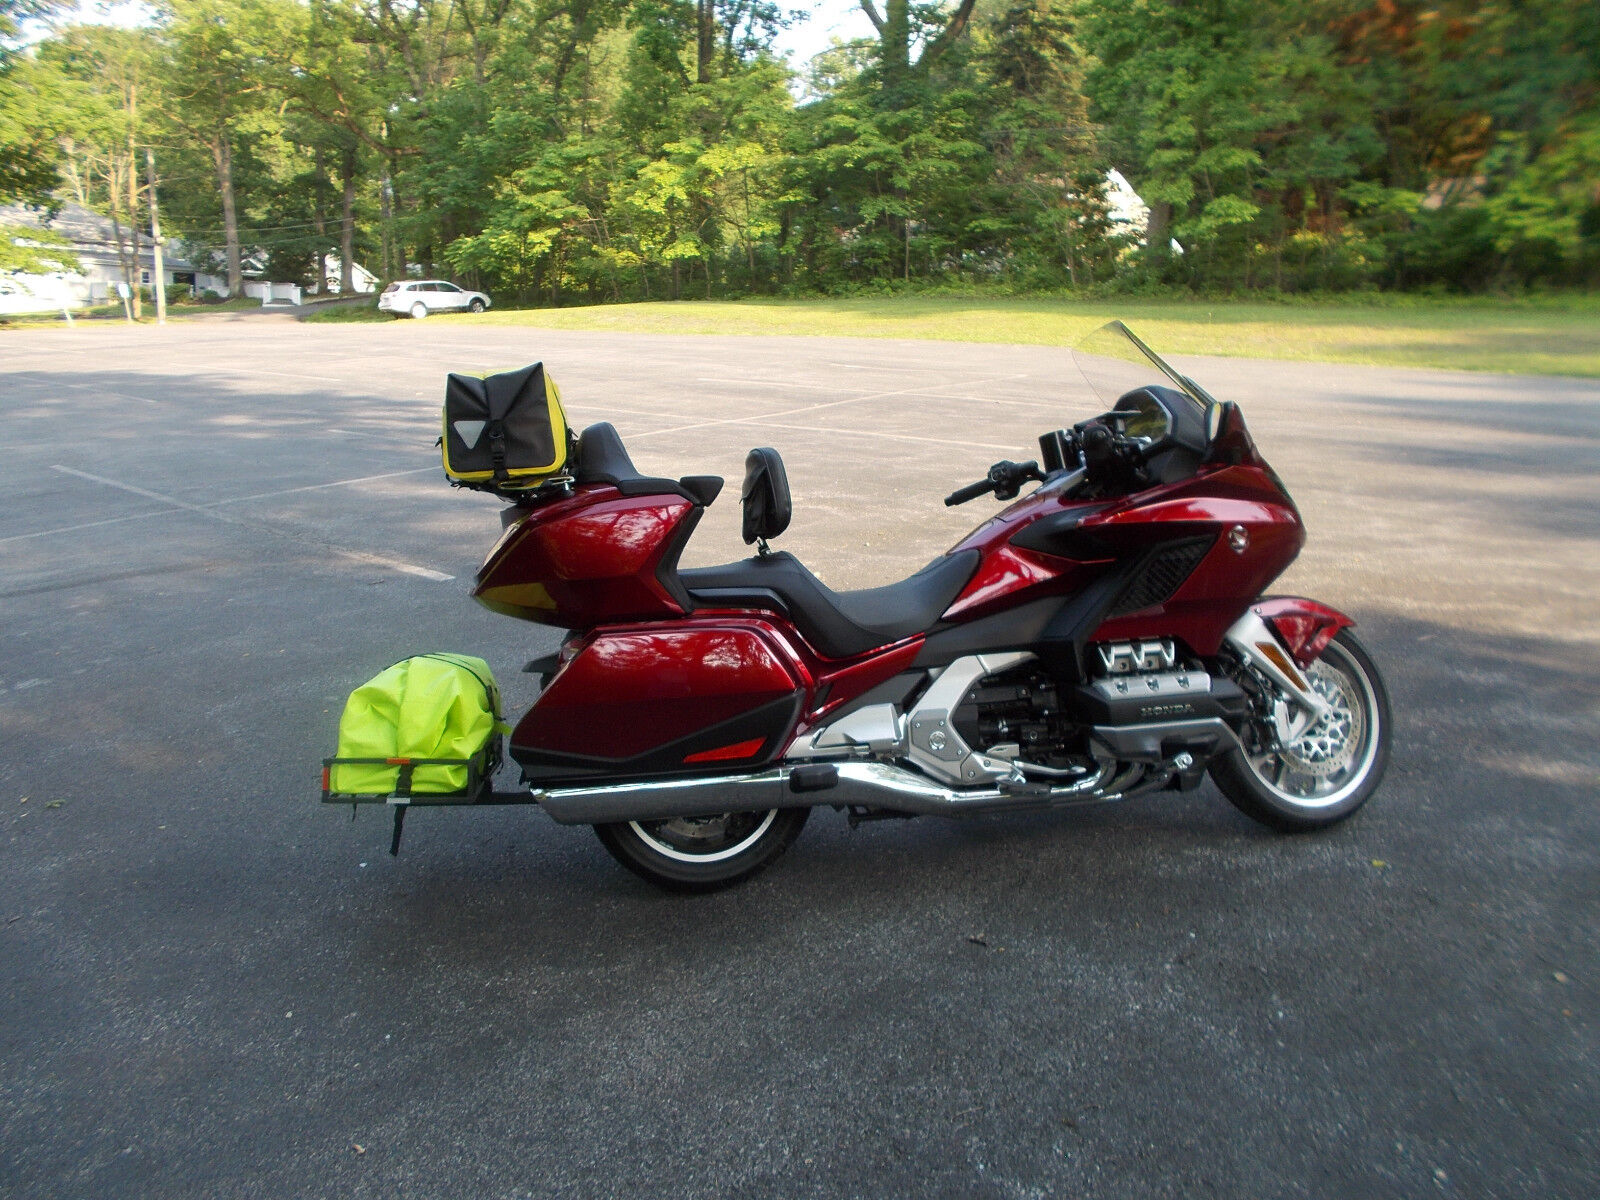 BEST BUY MOTORCYCLE COOLER RACK FOR ALL GOLDWING HITCH, HARLEY HITCH,TRIKE HITCH